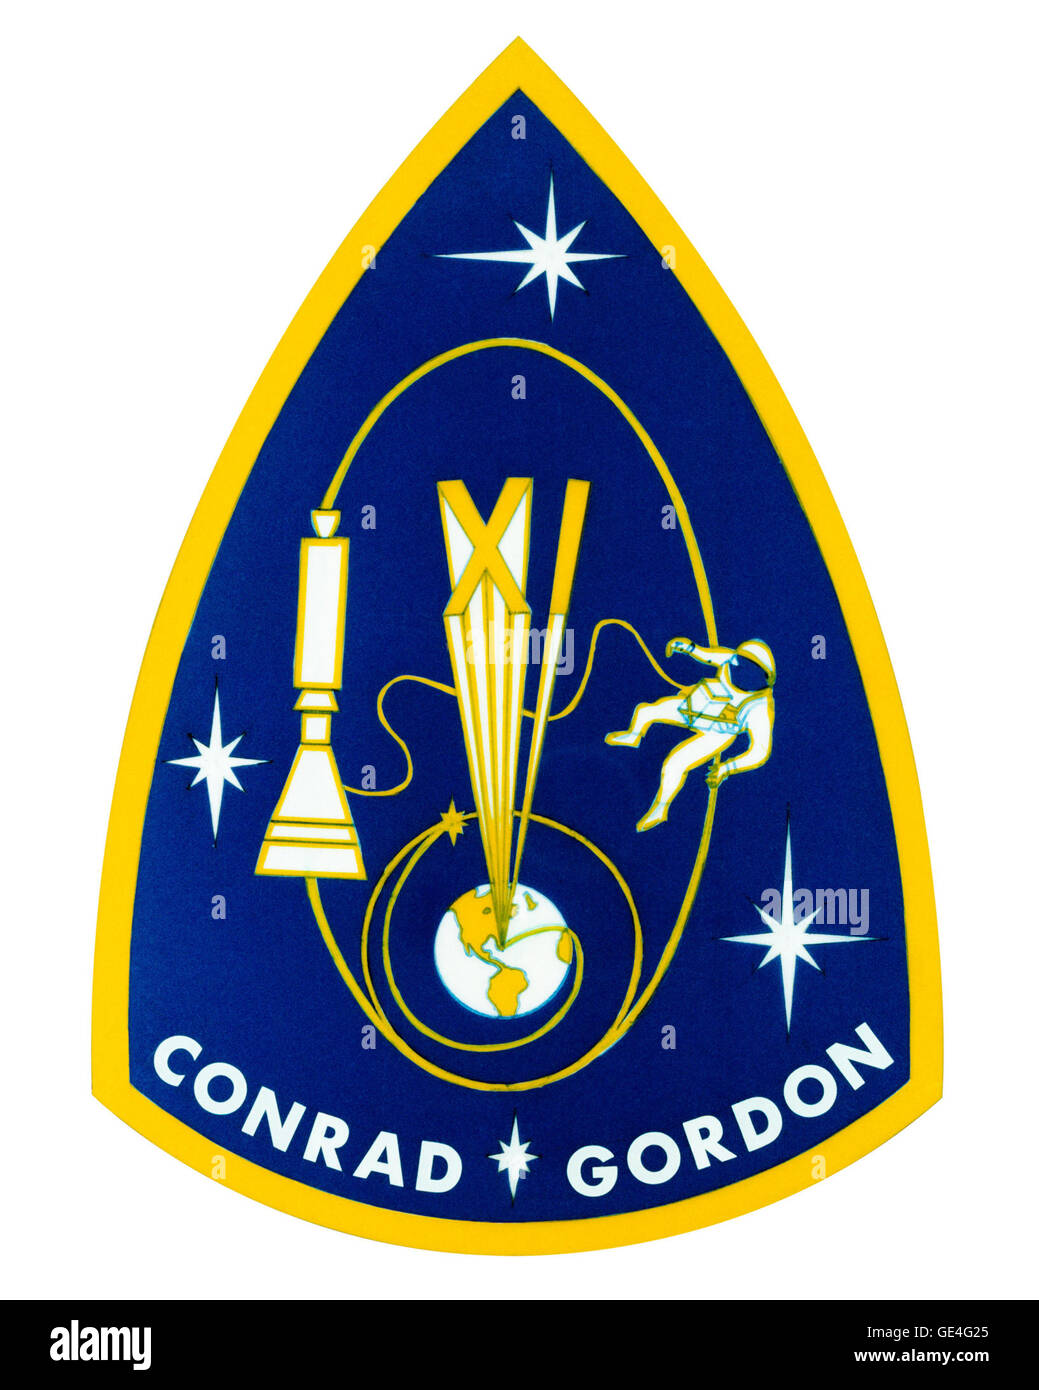 September 12-15, 1966 – 2 days, 23 hours, 17 minutes, 8 seconds Astronauts – Charles Conrad, Jr. (Commander), Richard F. Gordon, Jr. (Pilot) The primary objective of the Gemini XI mission was to rendezvous with the GATV-5006, as well as practicing docking, and performing EVA.   www-pao.ksc.nasa.gov/history/gemini/gemini-11/gemini11.htm ( http://www-pao.ksc.nasa.gov/history/gemini/gemini-11/gemini11.htm ) Stock Photo